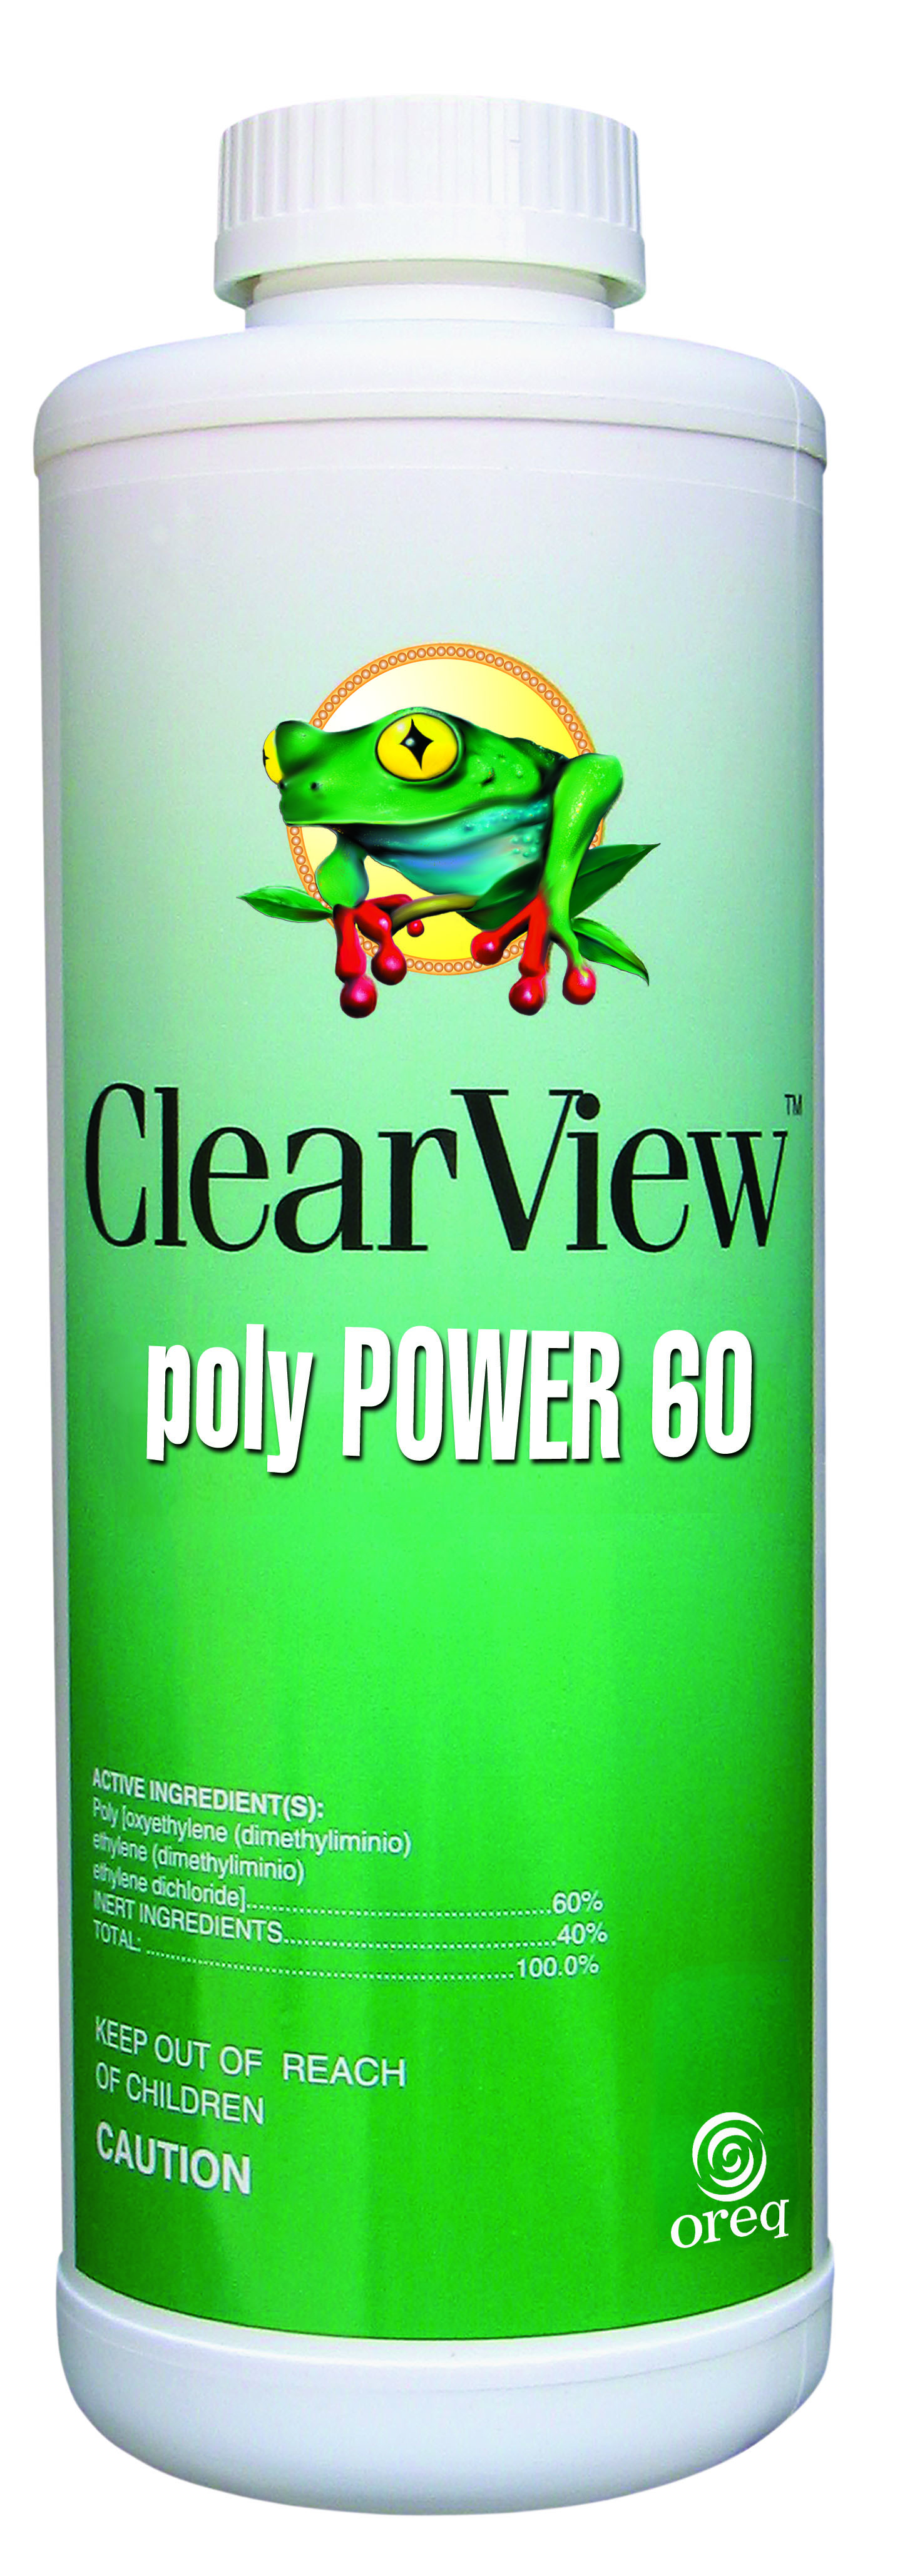 Clearview Polypower 60 12 X 1 qt - CLEARVIEW